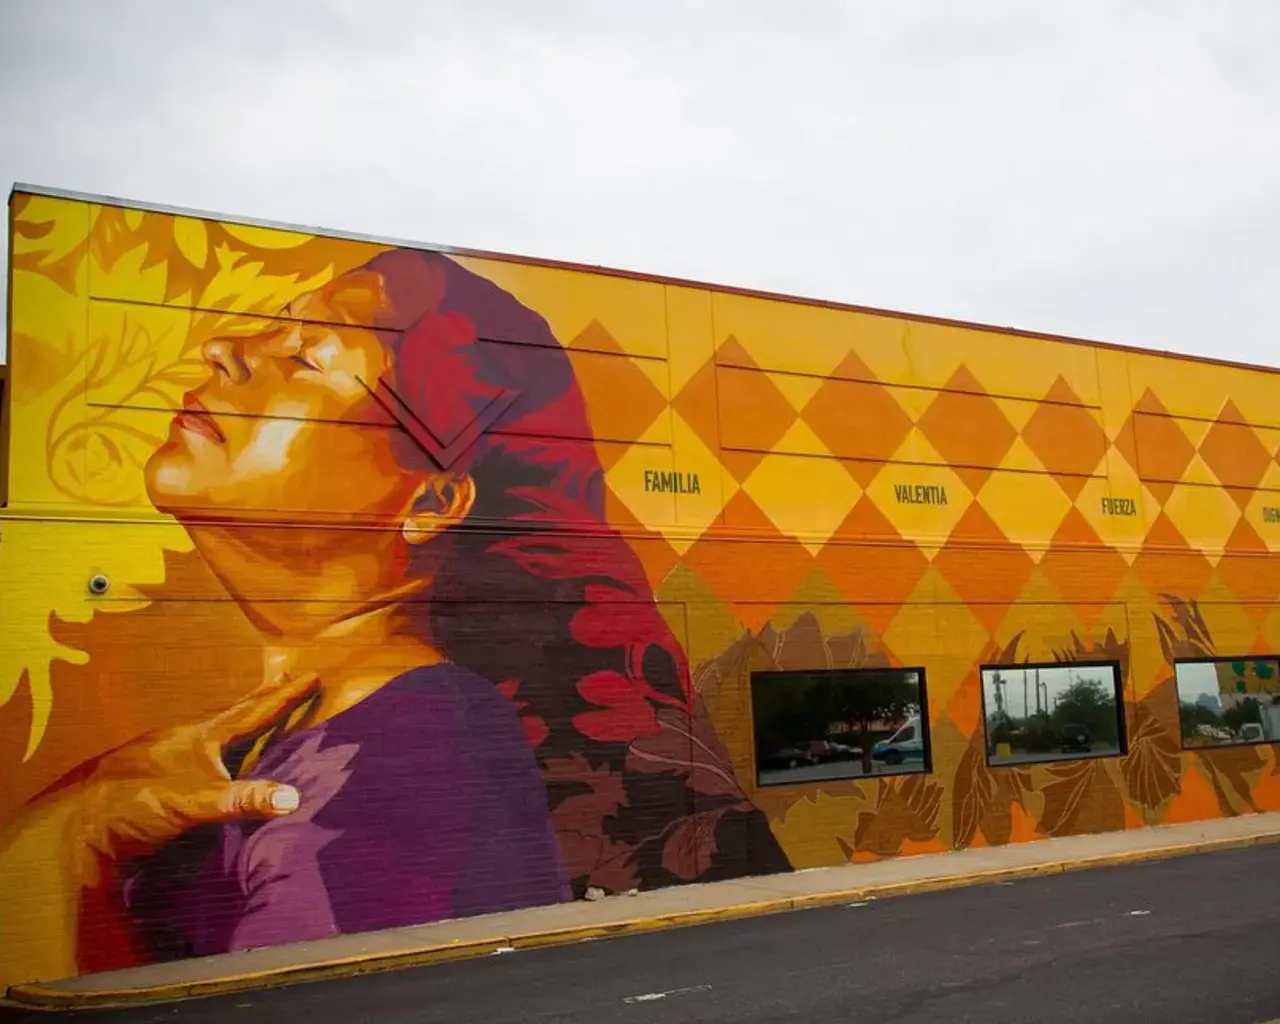 Michelle Angela Ortiz, Living Walls, The City Speaks project. Photo courtesy of the artist.